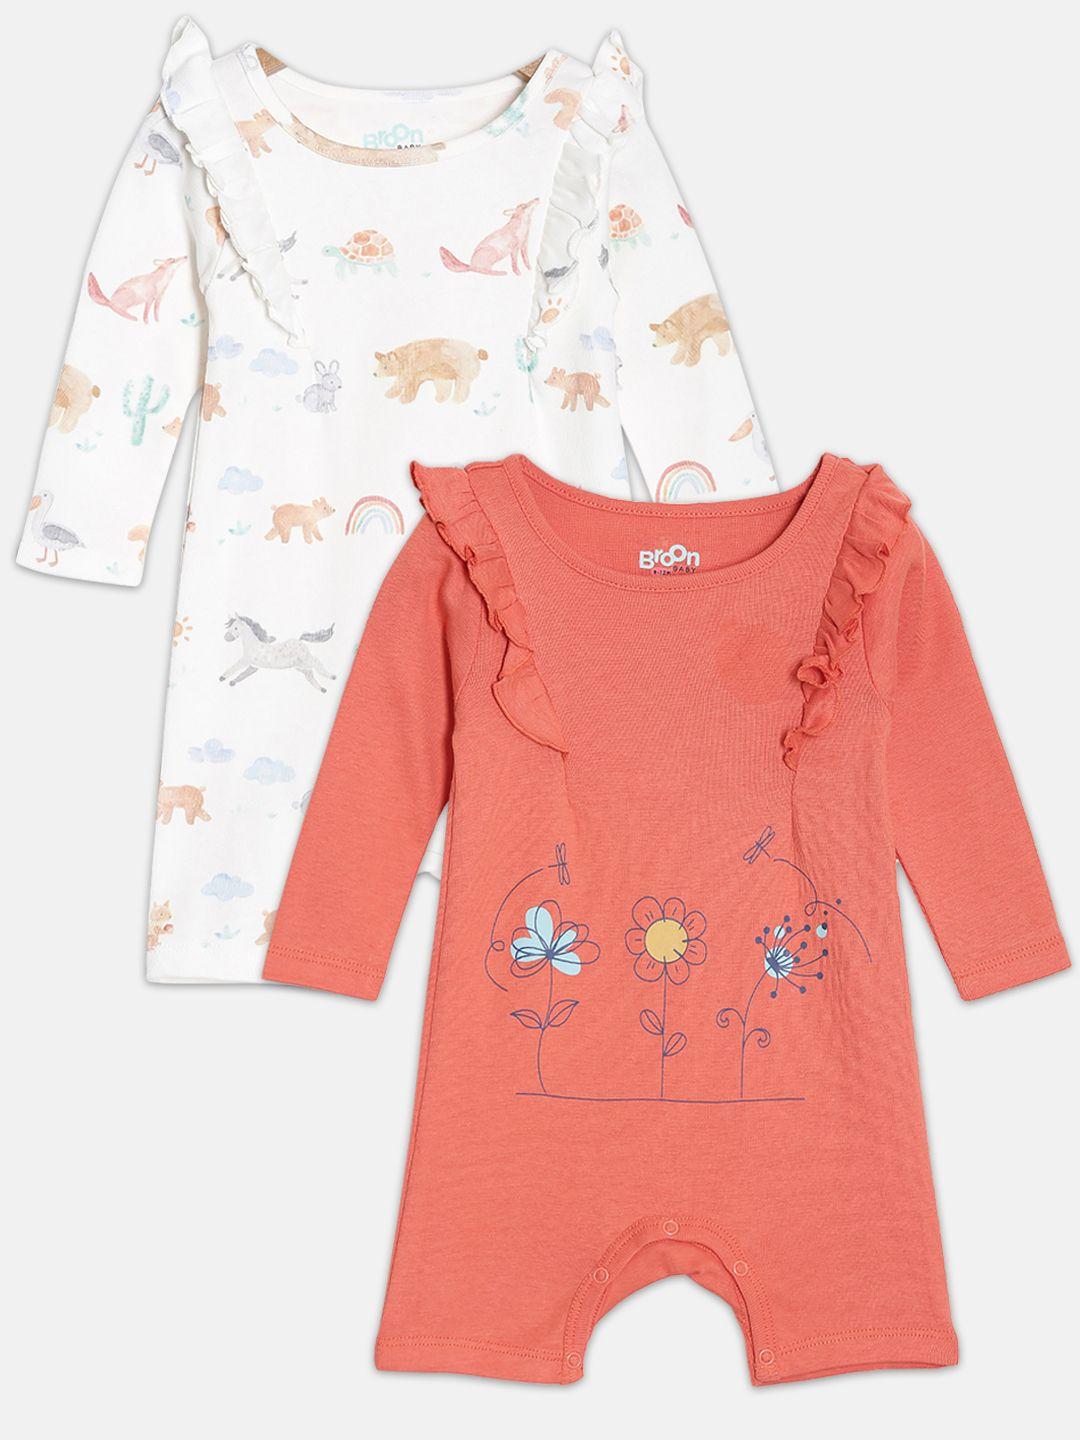 broon girls pack of 2 orange & off white printed pure organic cotton rompers